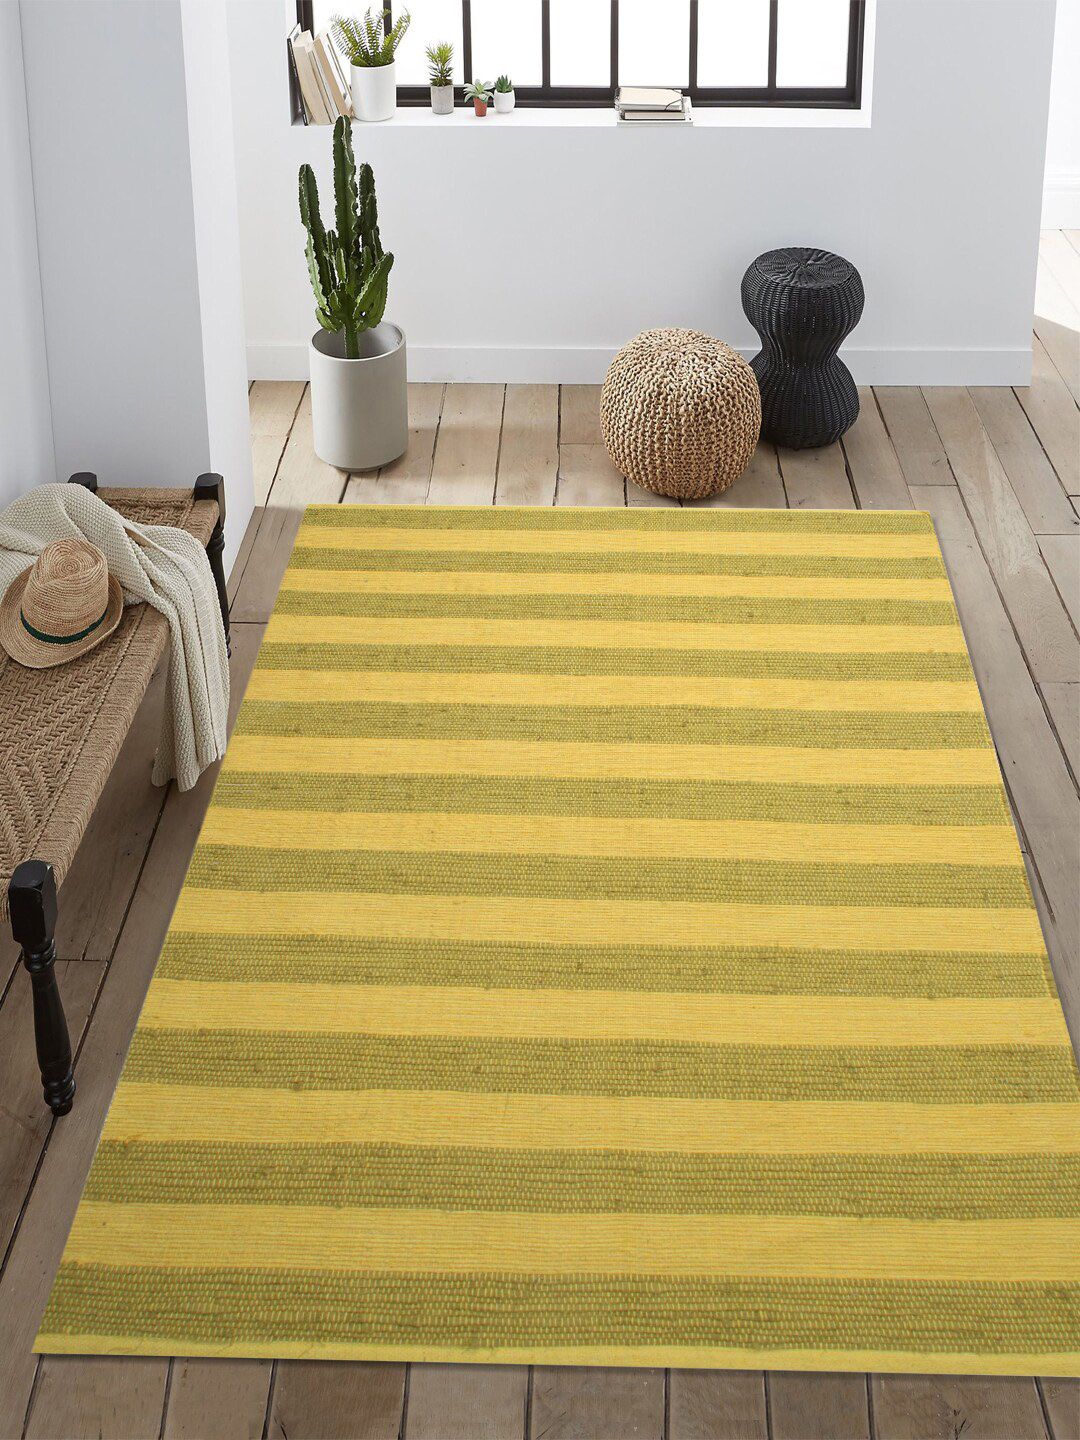 Saral Home Yellow & Green Striped Floor Mat Price in India